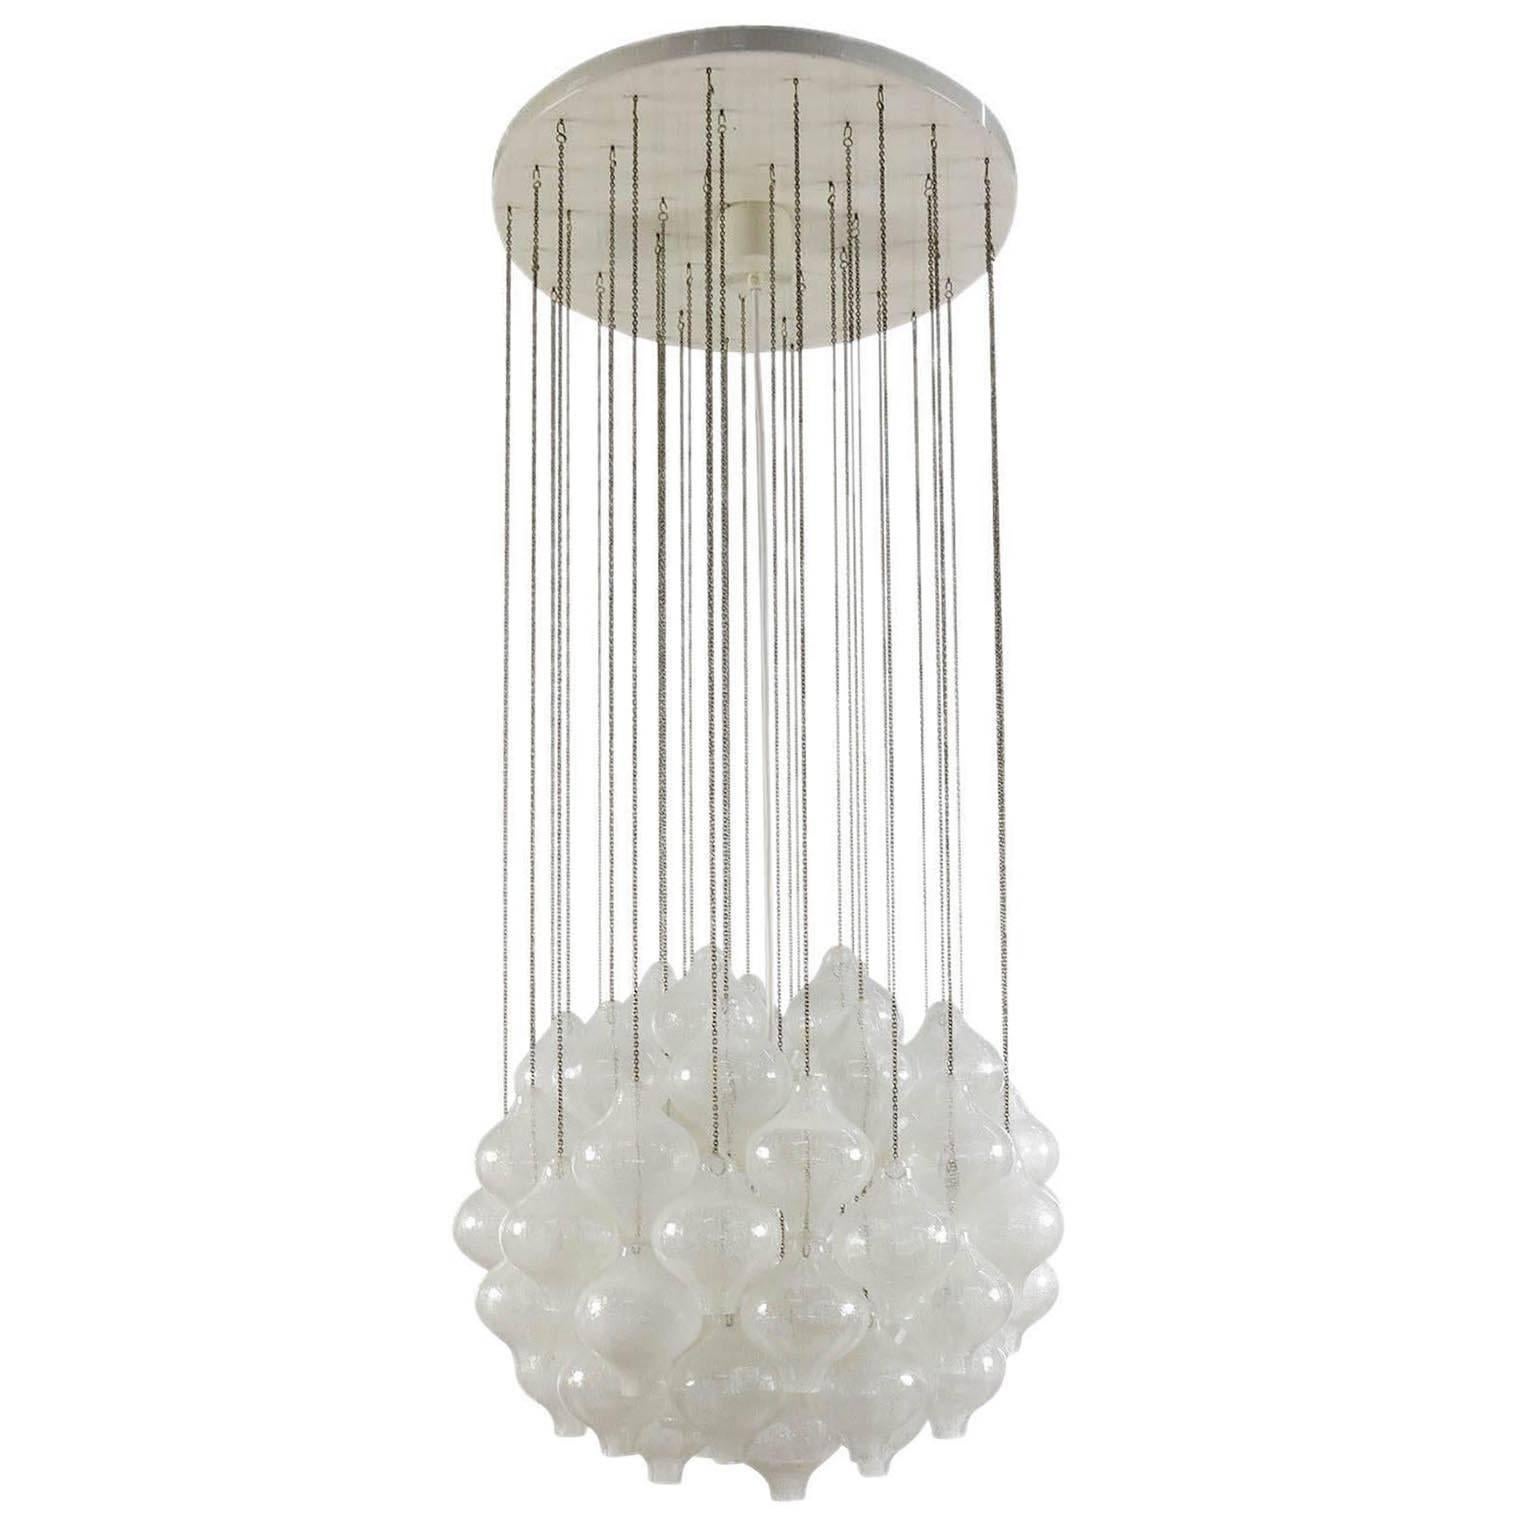 One of two rare 'Tulipan' glass pendant chandeliers by J.T. Kalmar, Austria, Vienna, manufactured in Midcentury, circa 1970 (late 1960s or early 1970s). The name Tulipan derives from the tulip shaped hand blown bubble glasses. Each glass is handmade